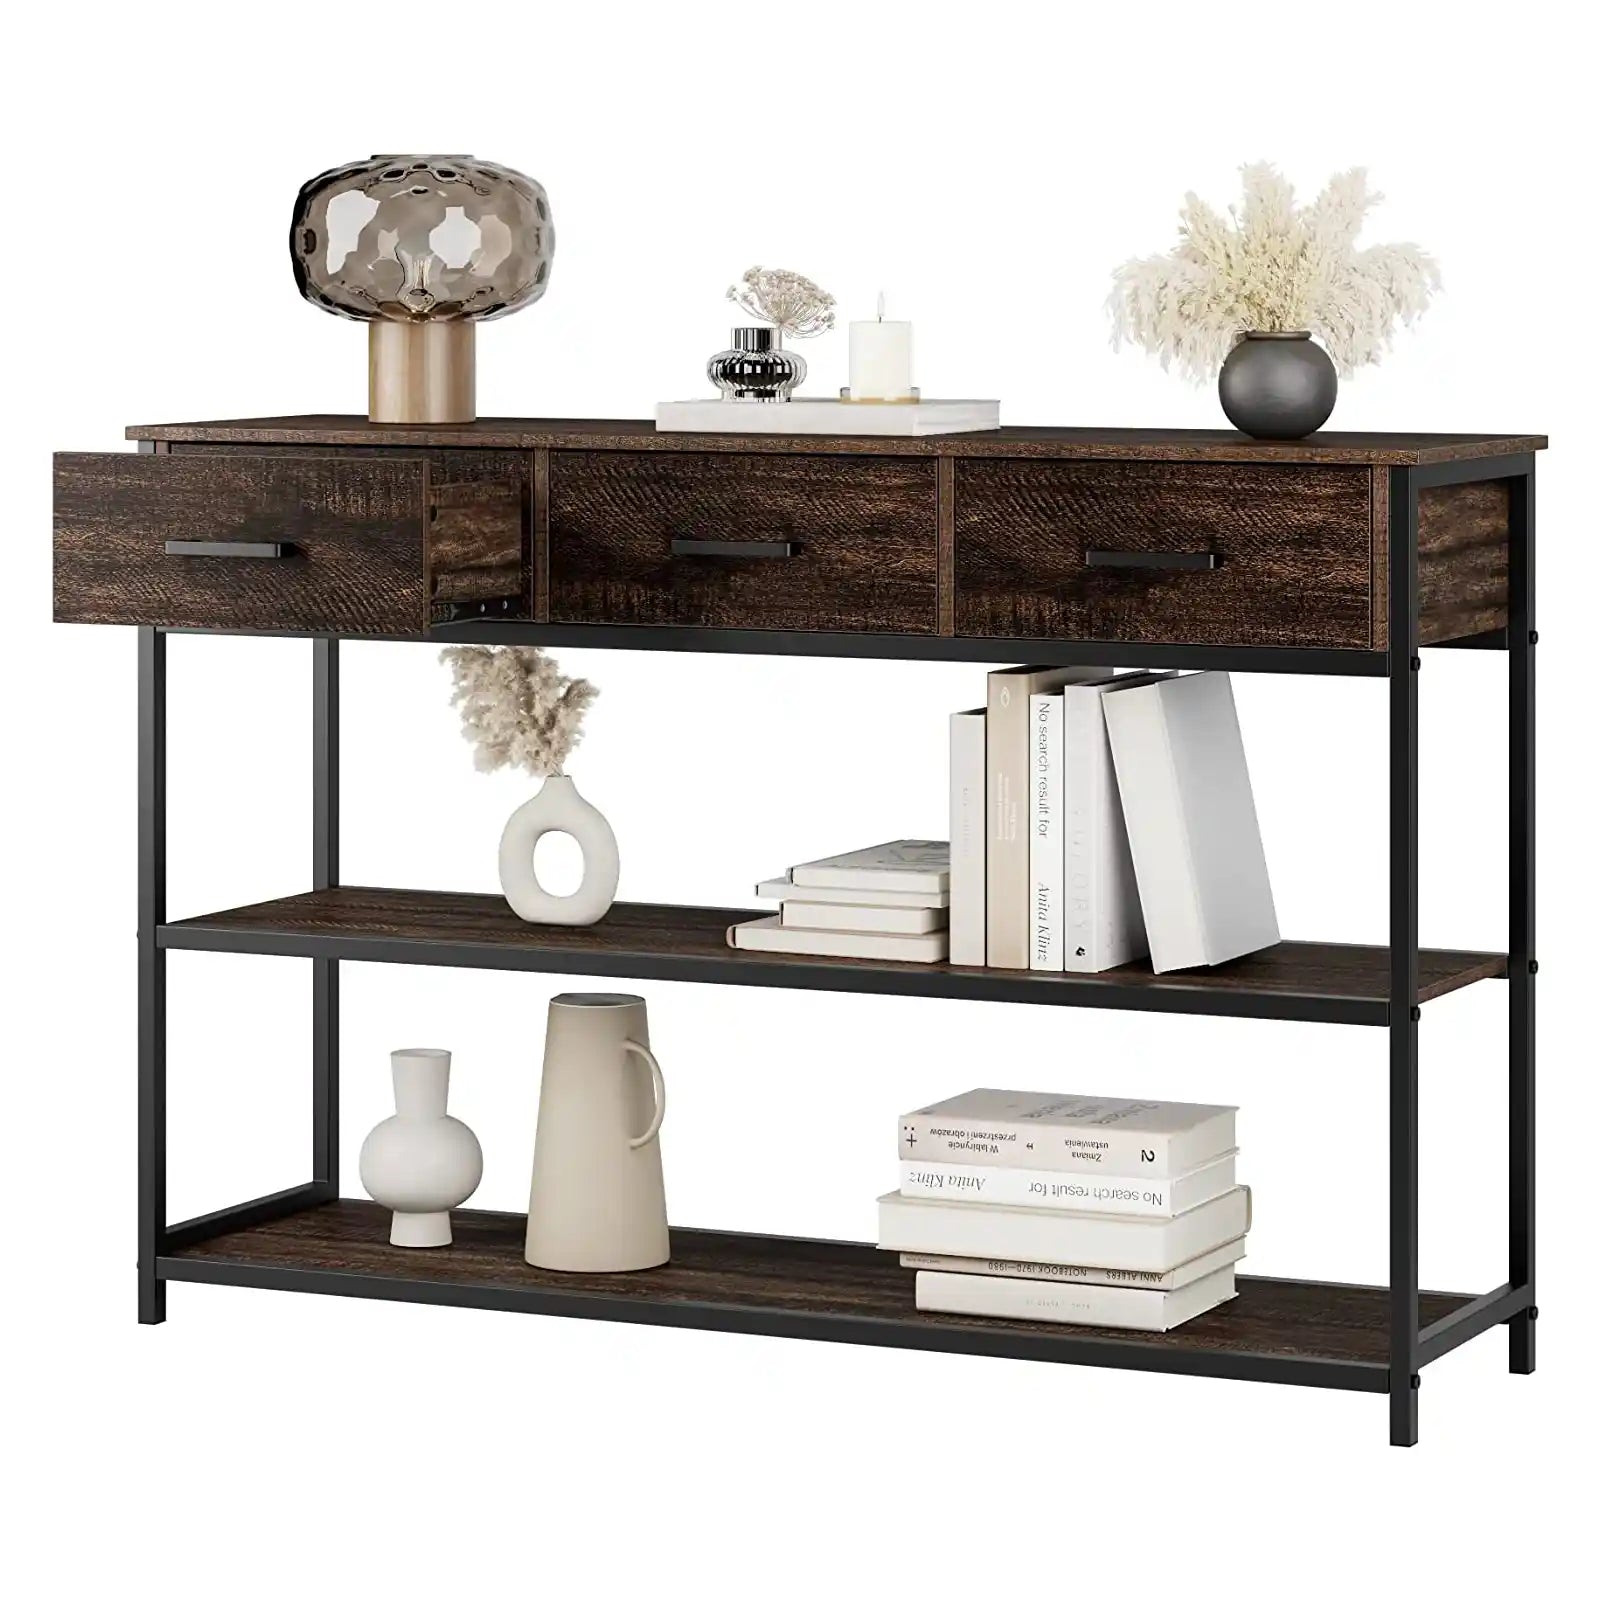 Console Table with 3 Drawers, Industrial Sofa Table, Entryway Table with 3-Tier Storage Shelves, Rustic Narrow Entry Table for Living Room/Entryway/Hallway, Stable Metal Support